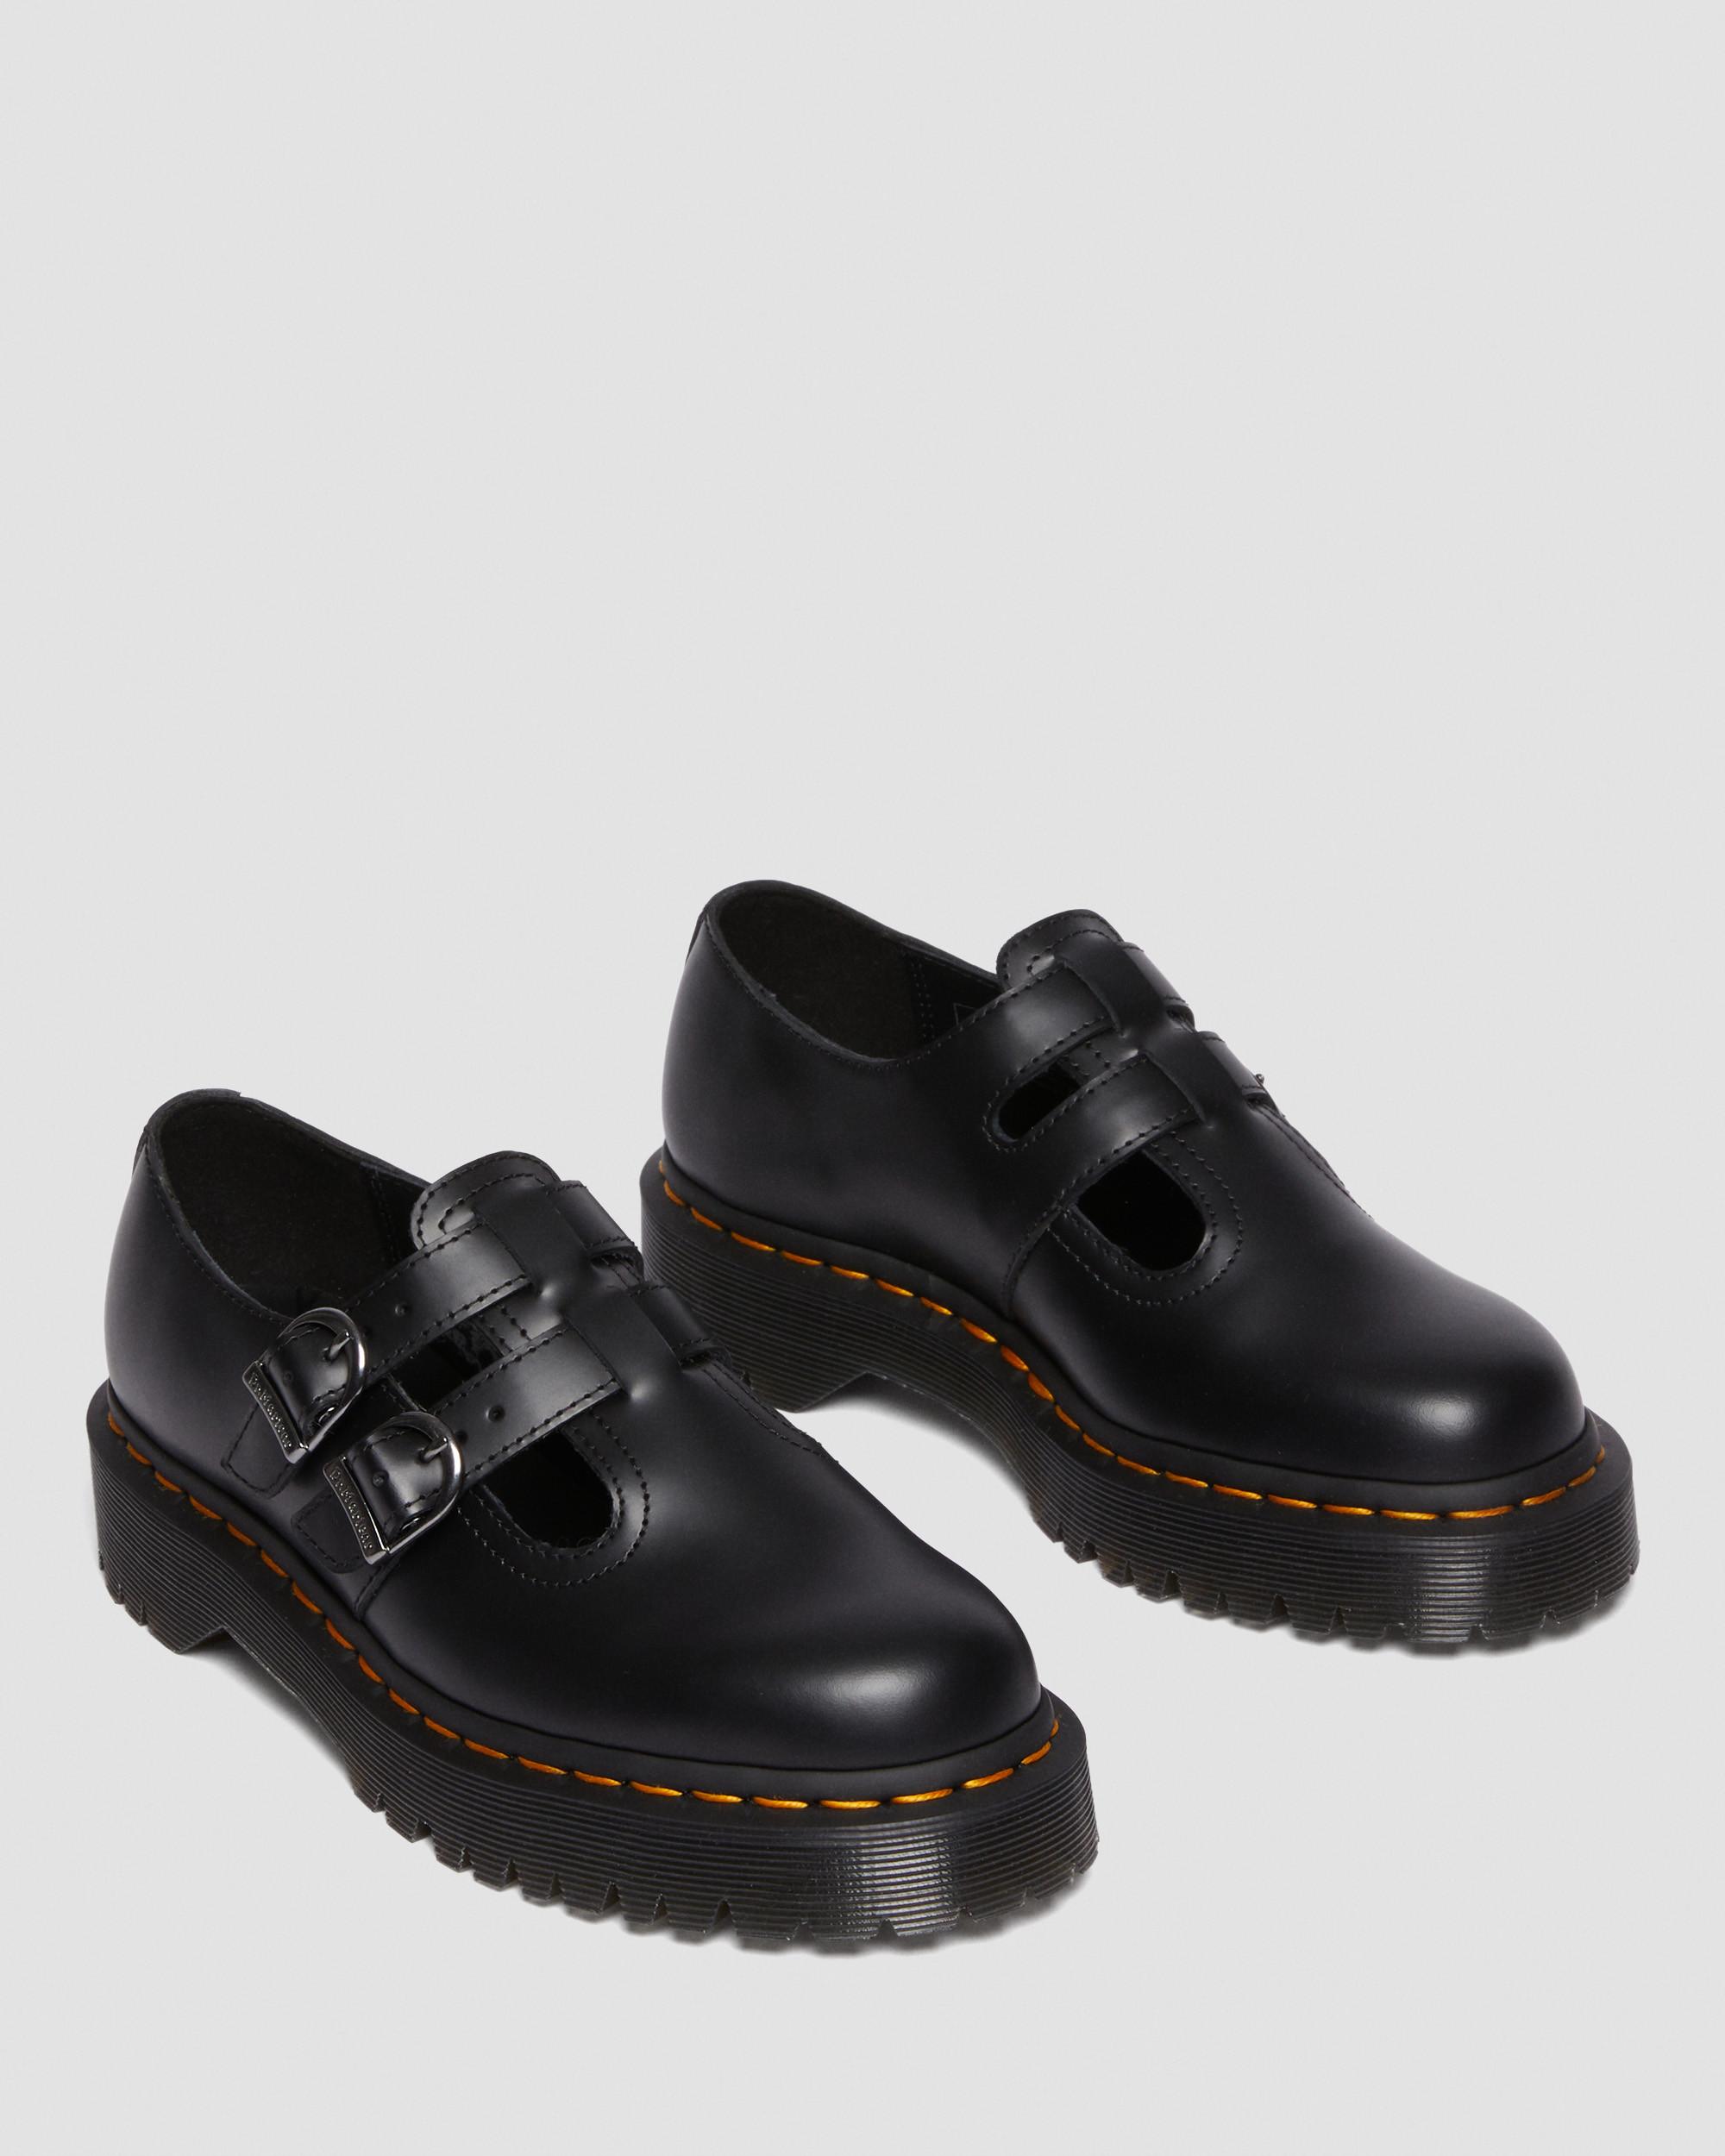 8065 II Bex Smooth Leather Platform Mary Jane Shoes in Black | Dr 